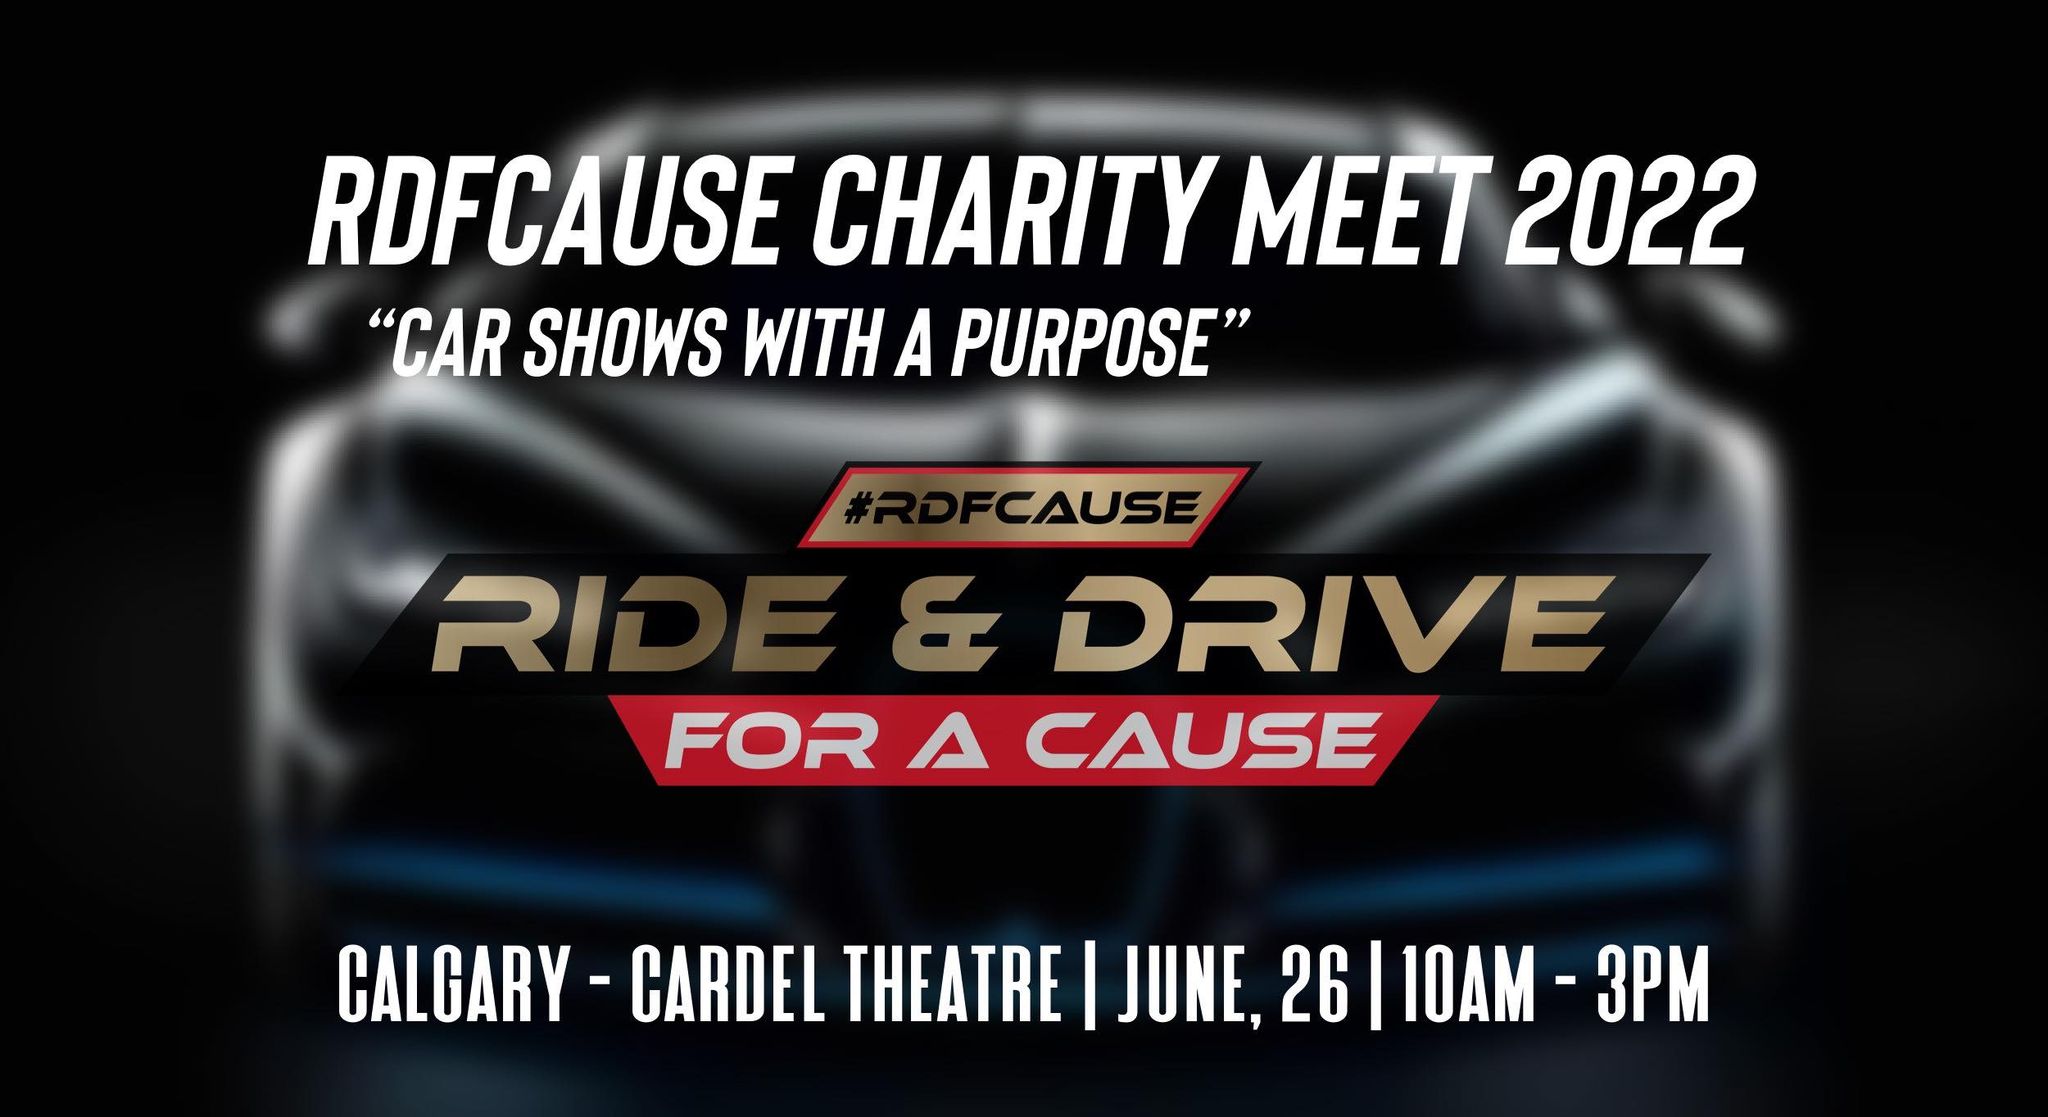 RDFCAUSE CHARITY MEET 2022